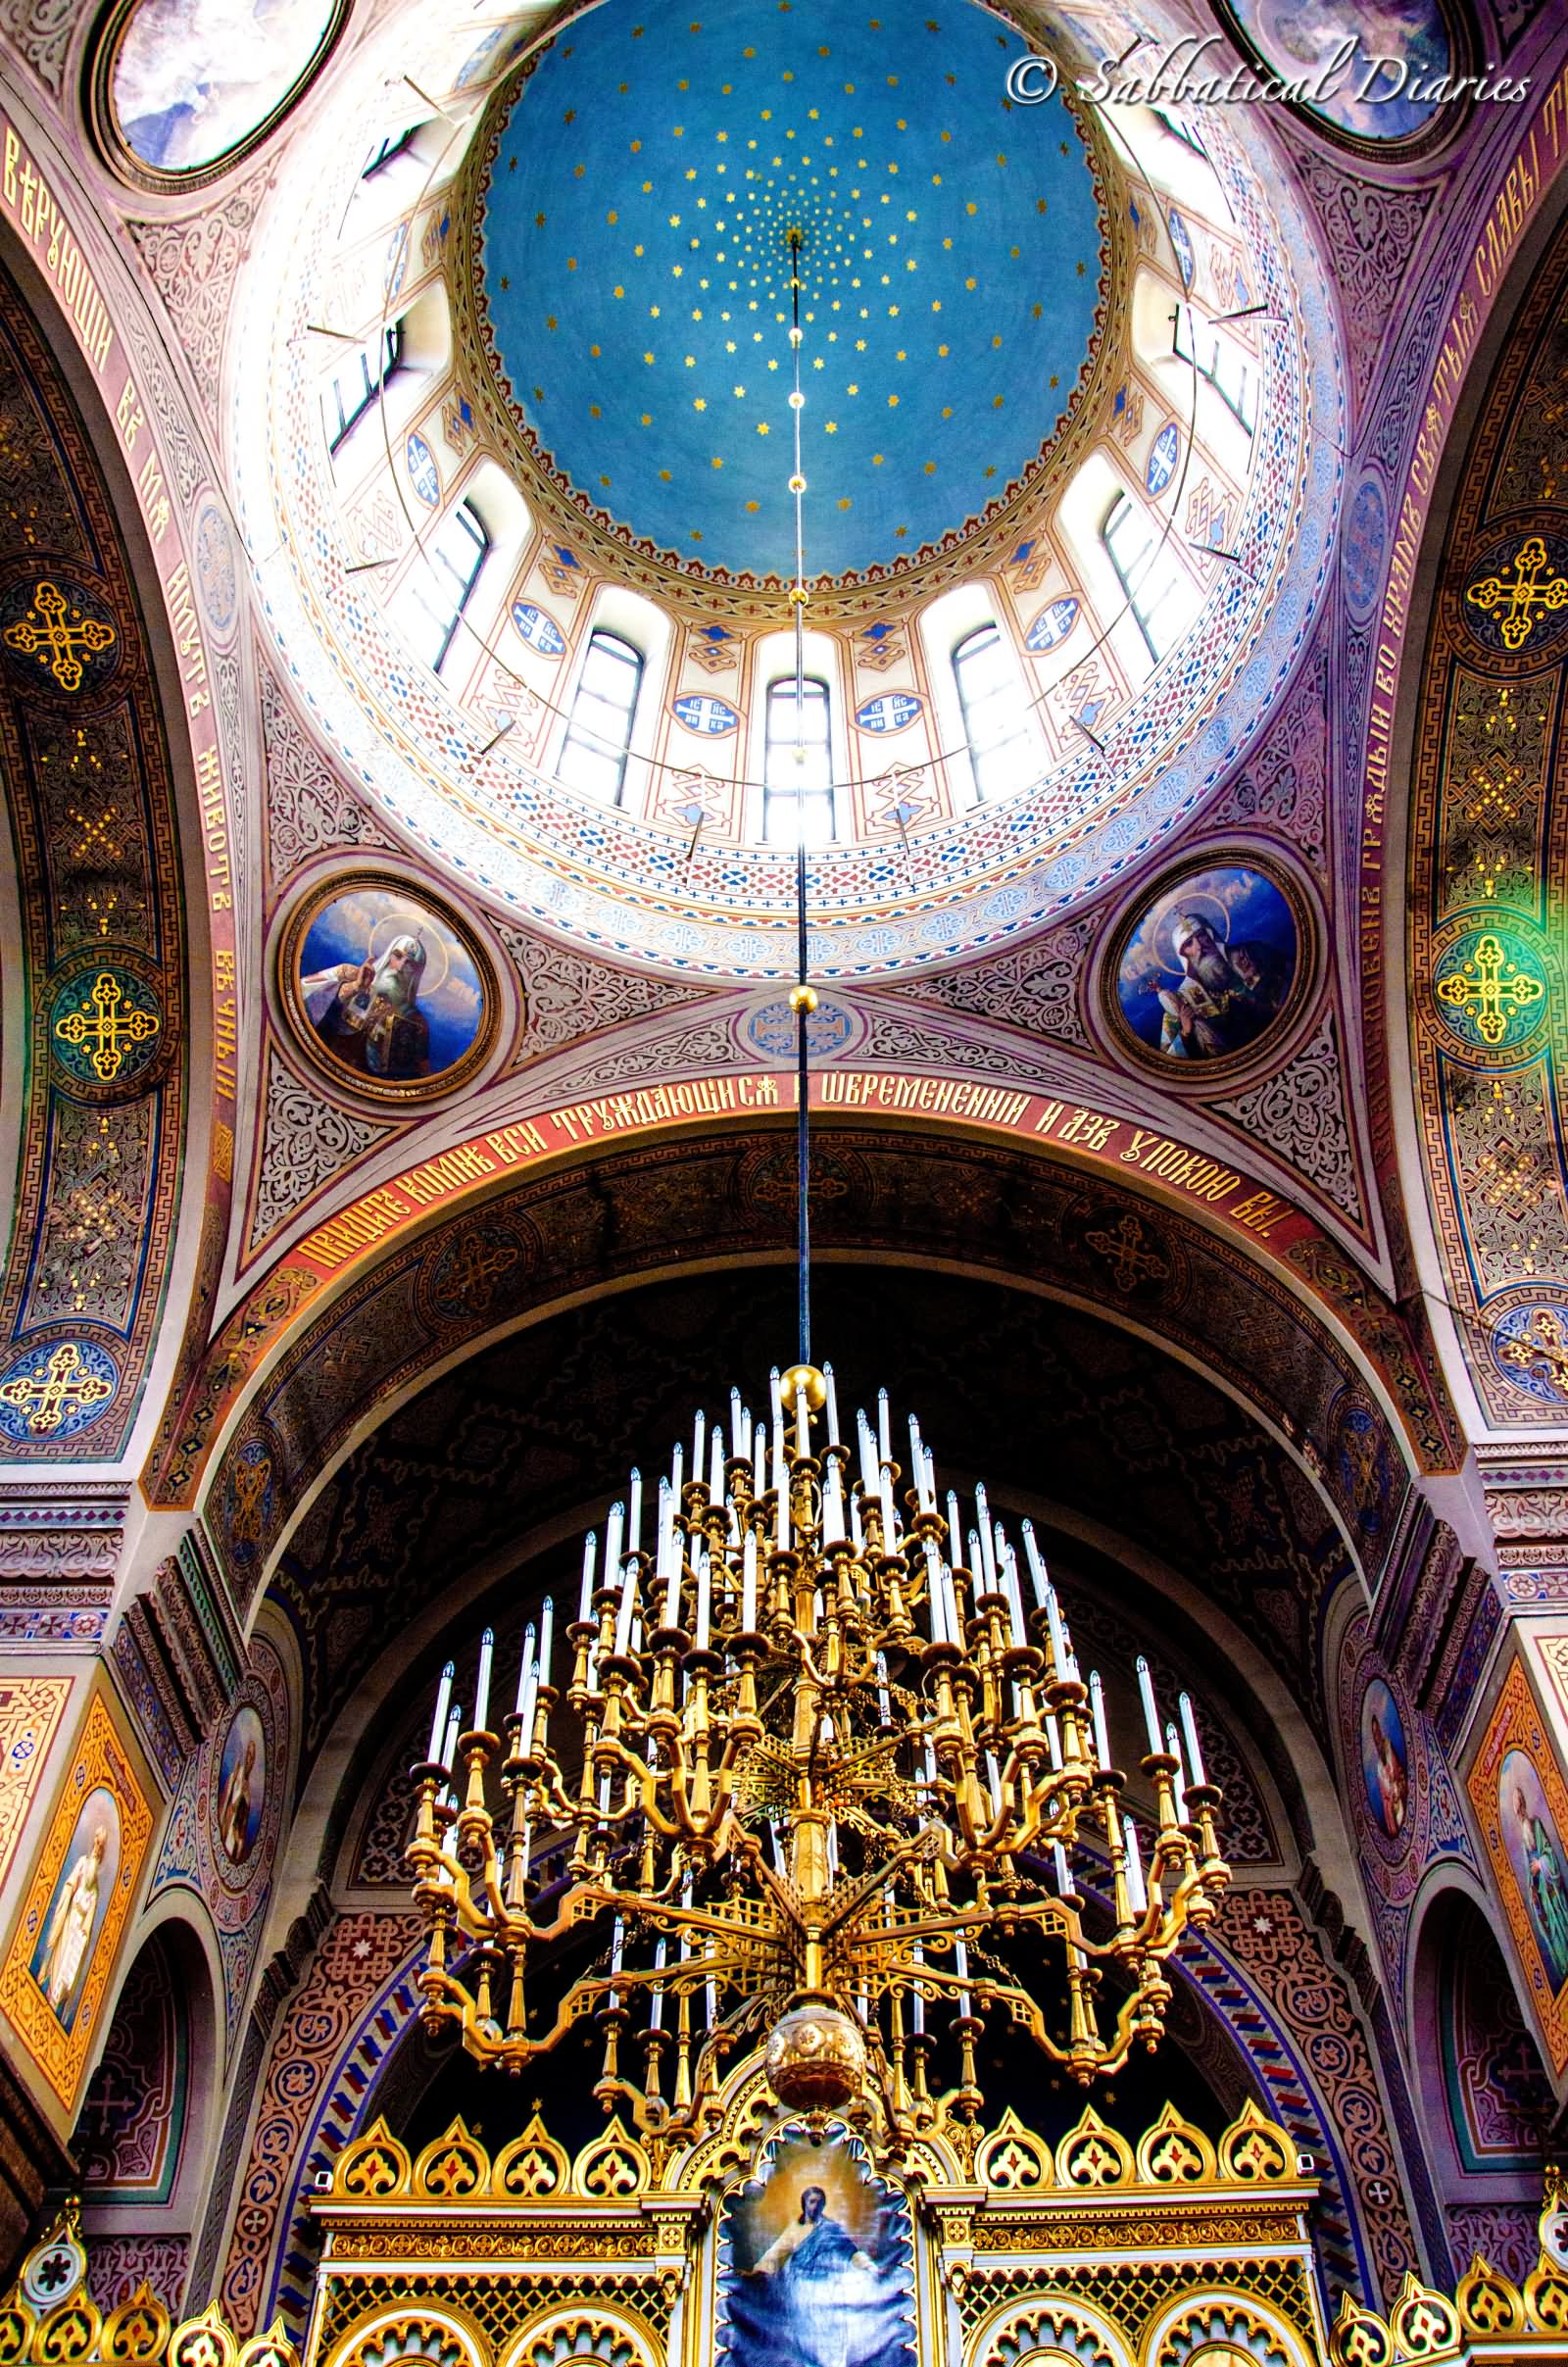 Dome And Chandelier Inside The Uspenski Cathedral